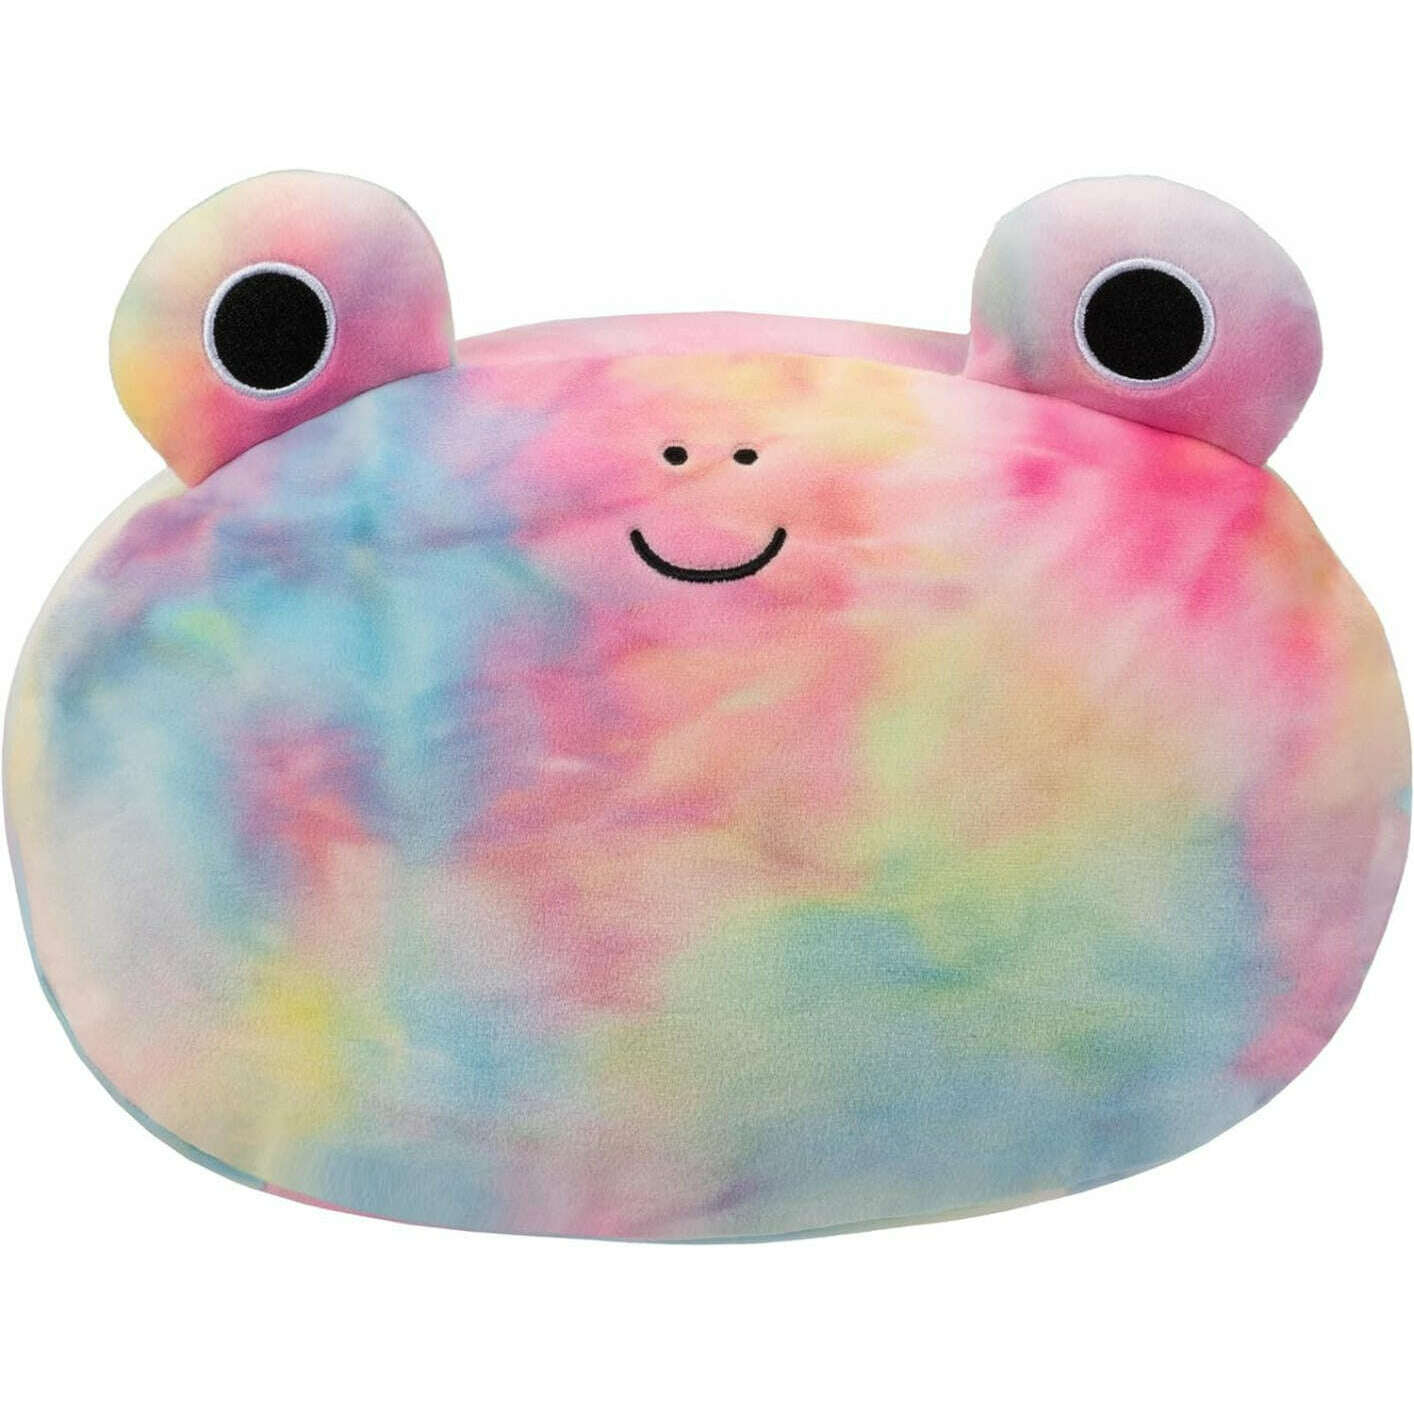 Toys N Tuck:Squishmallows Stackable 12 Inch Plush - Carlito The Frog,Squishmallows